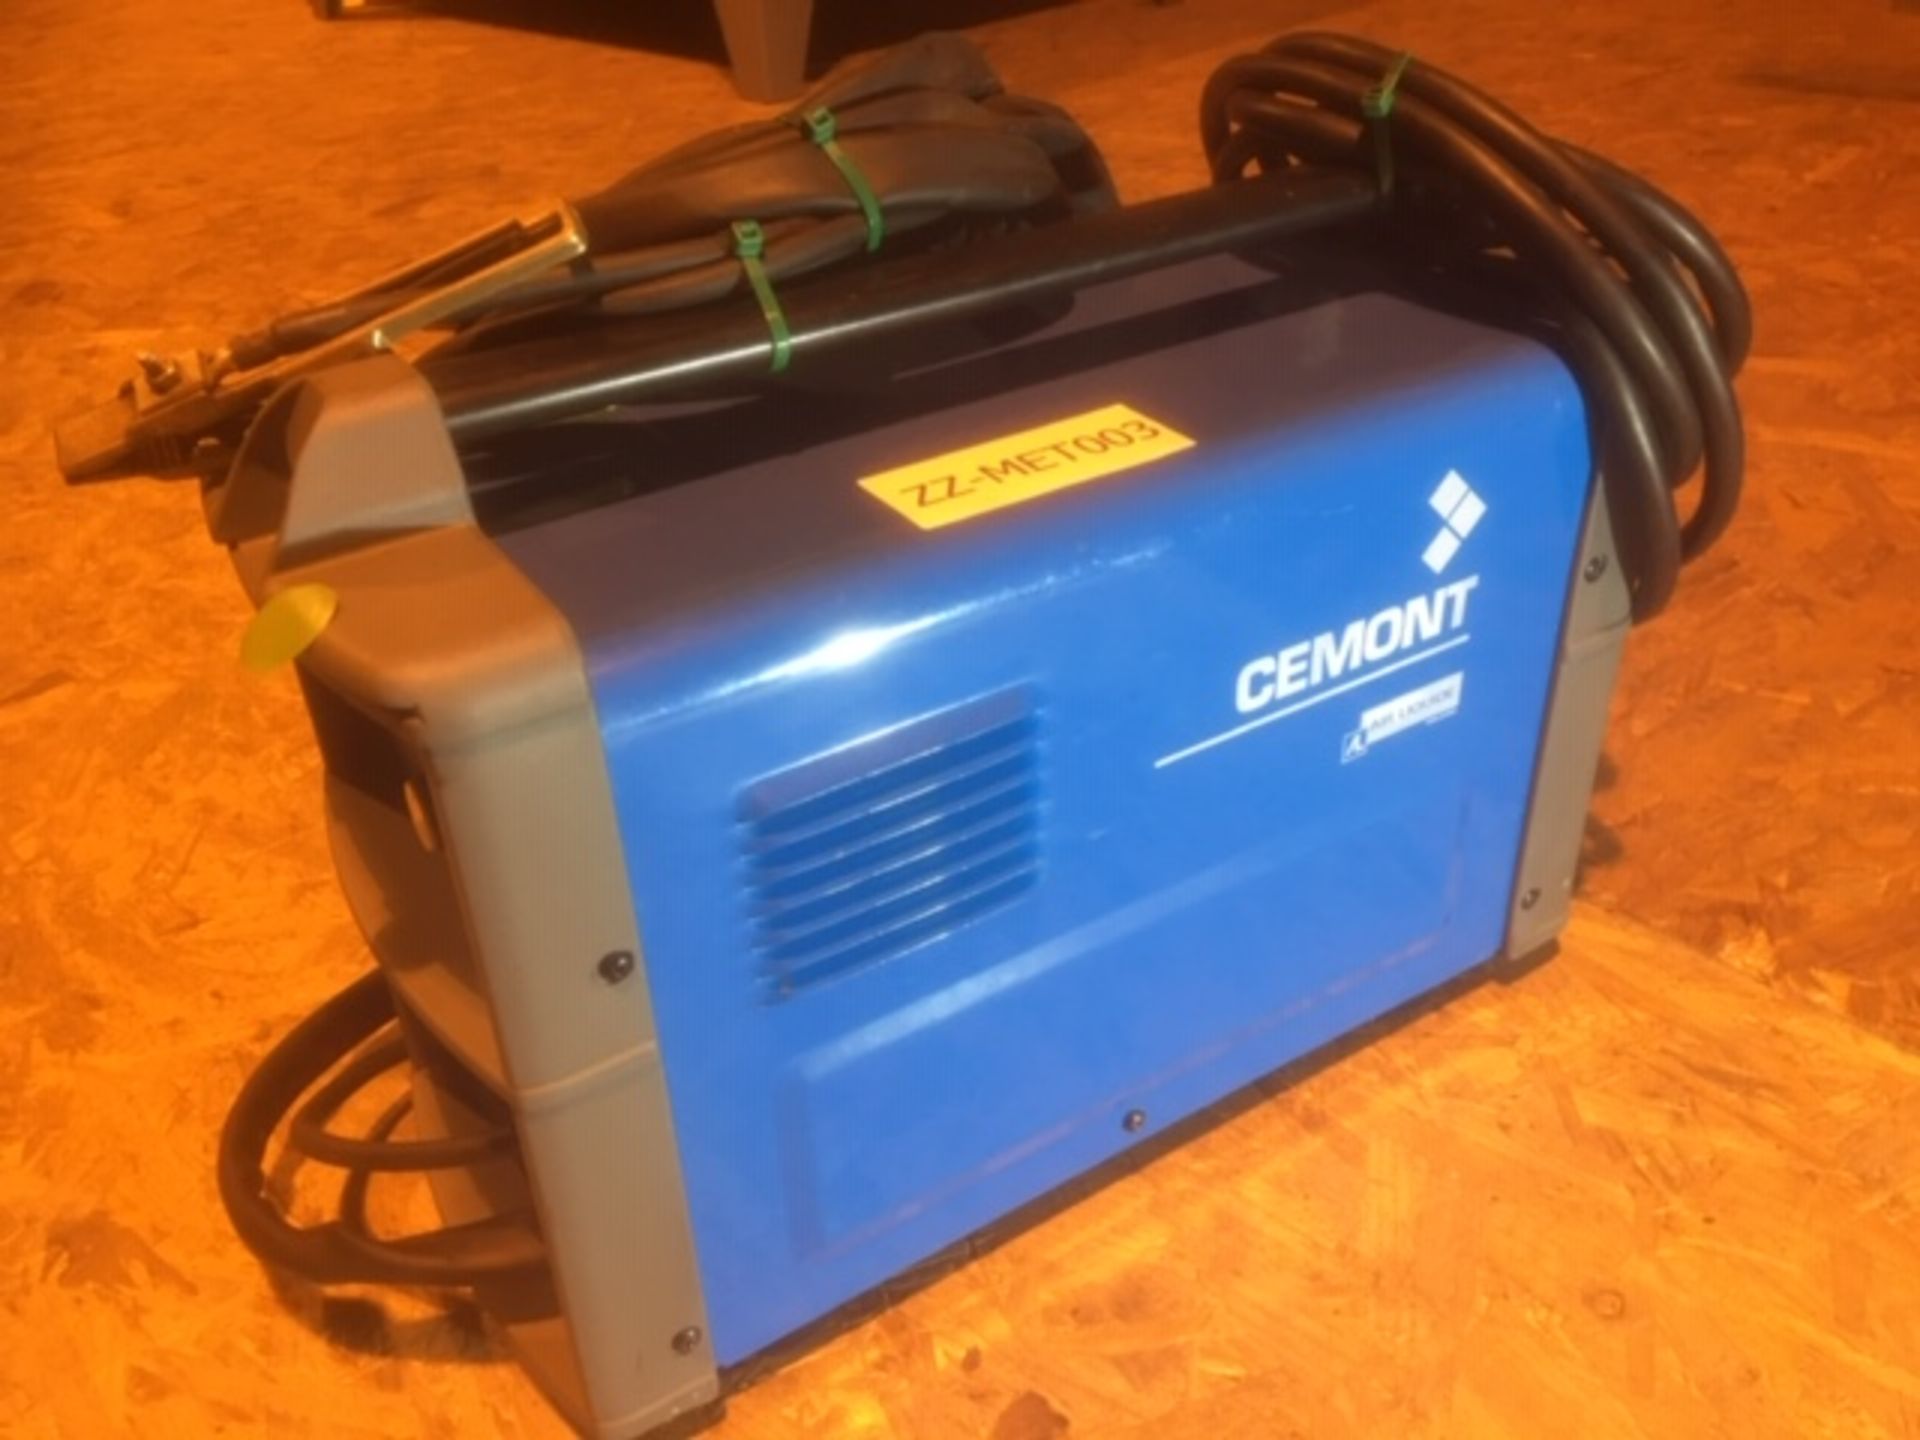 Cemont Sharp 10KT Portable Plasma Cutter, 240V, (vendors comments - these are our bestselling